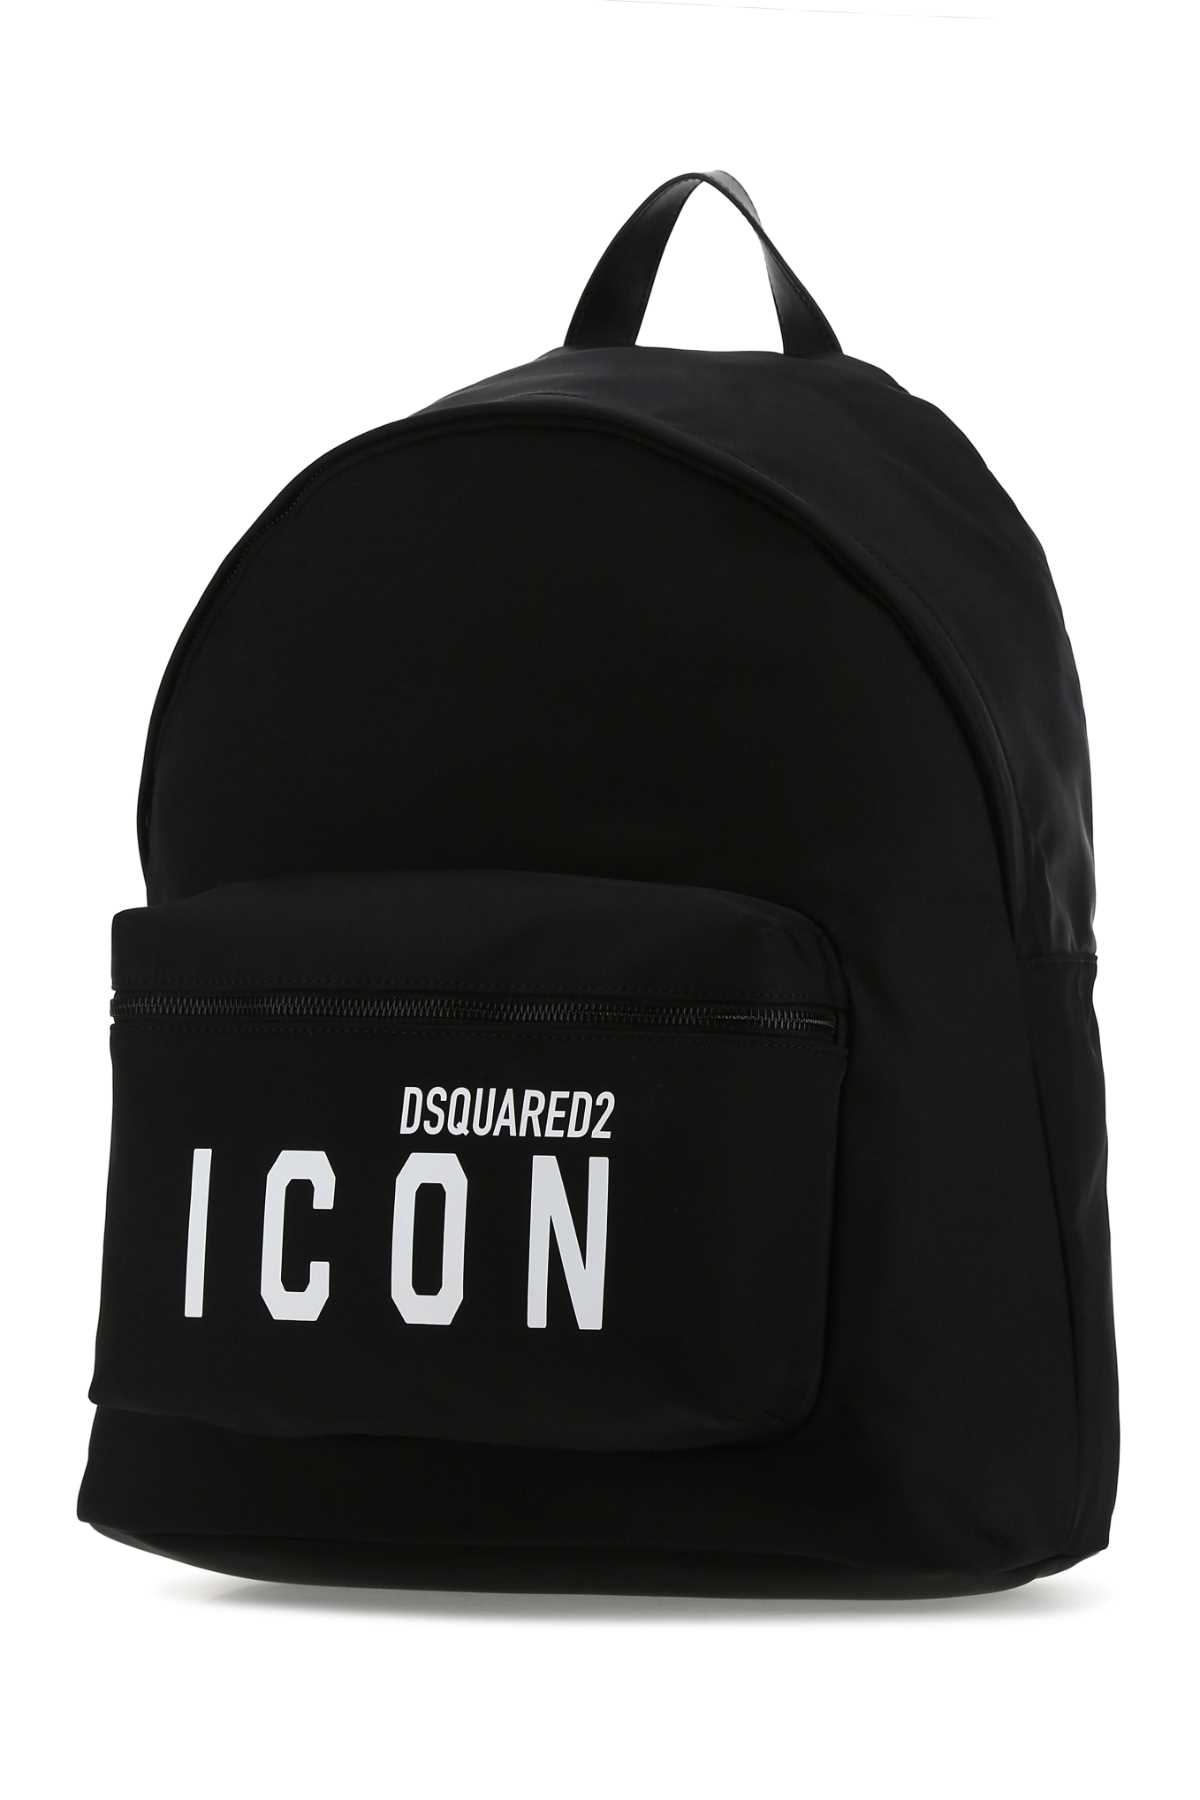 Dsquared2 Black Fabric Be Icon Backpack